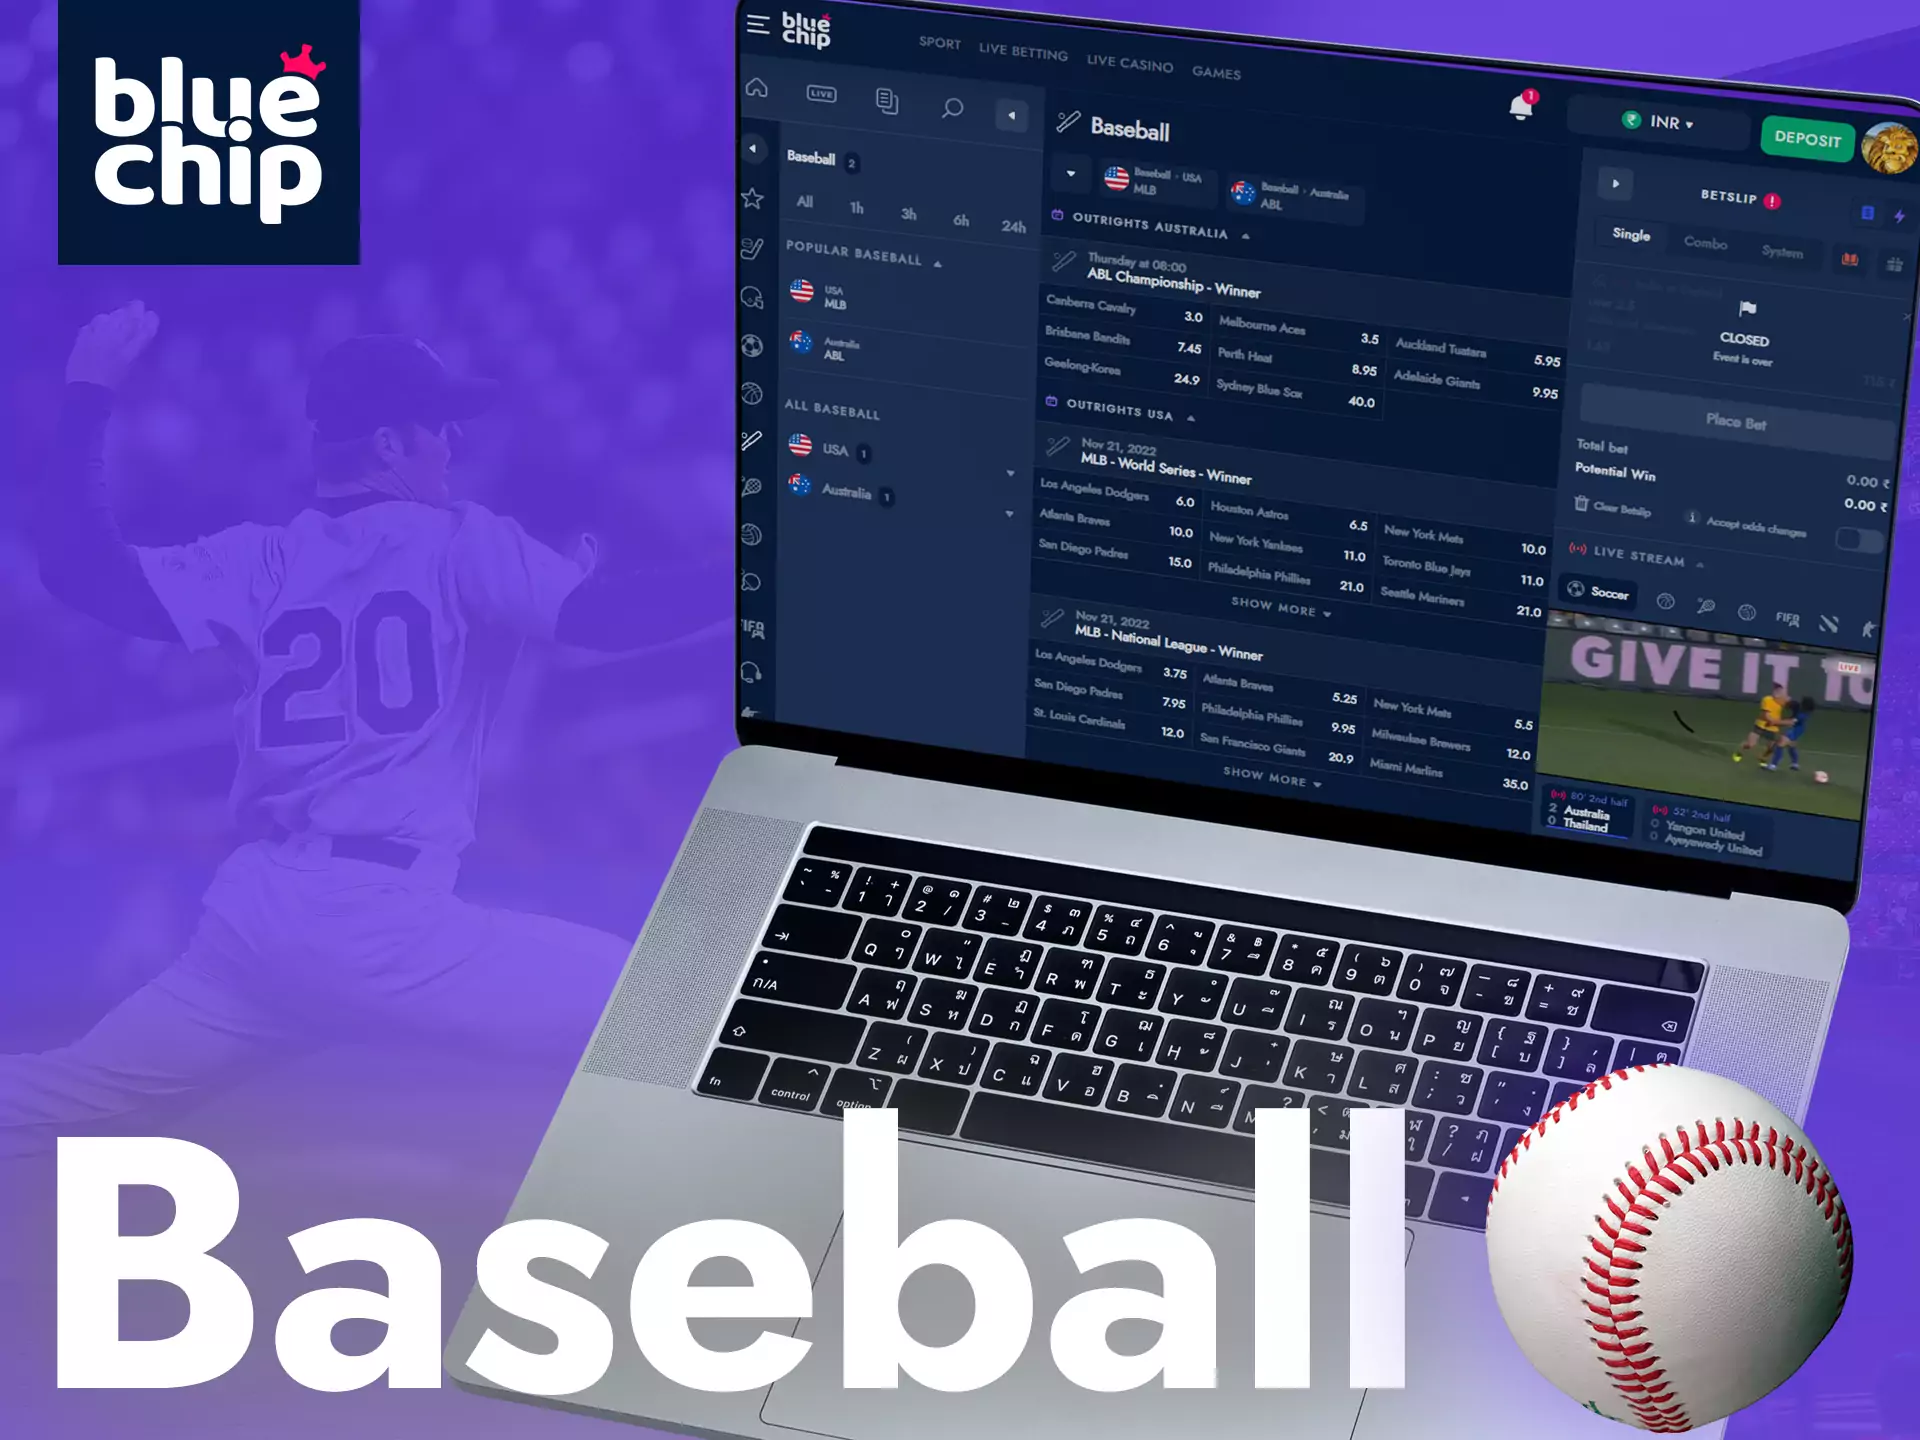 Baseball events are always available for betting in the Bluechip sportsbook.